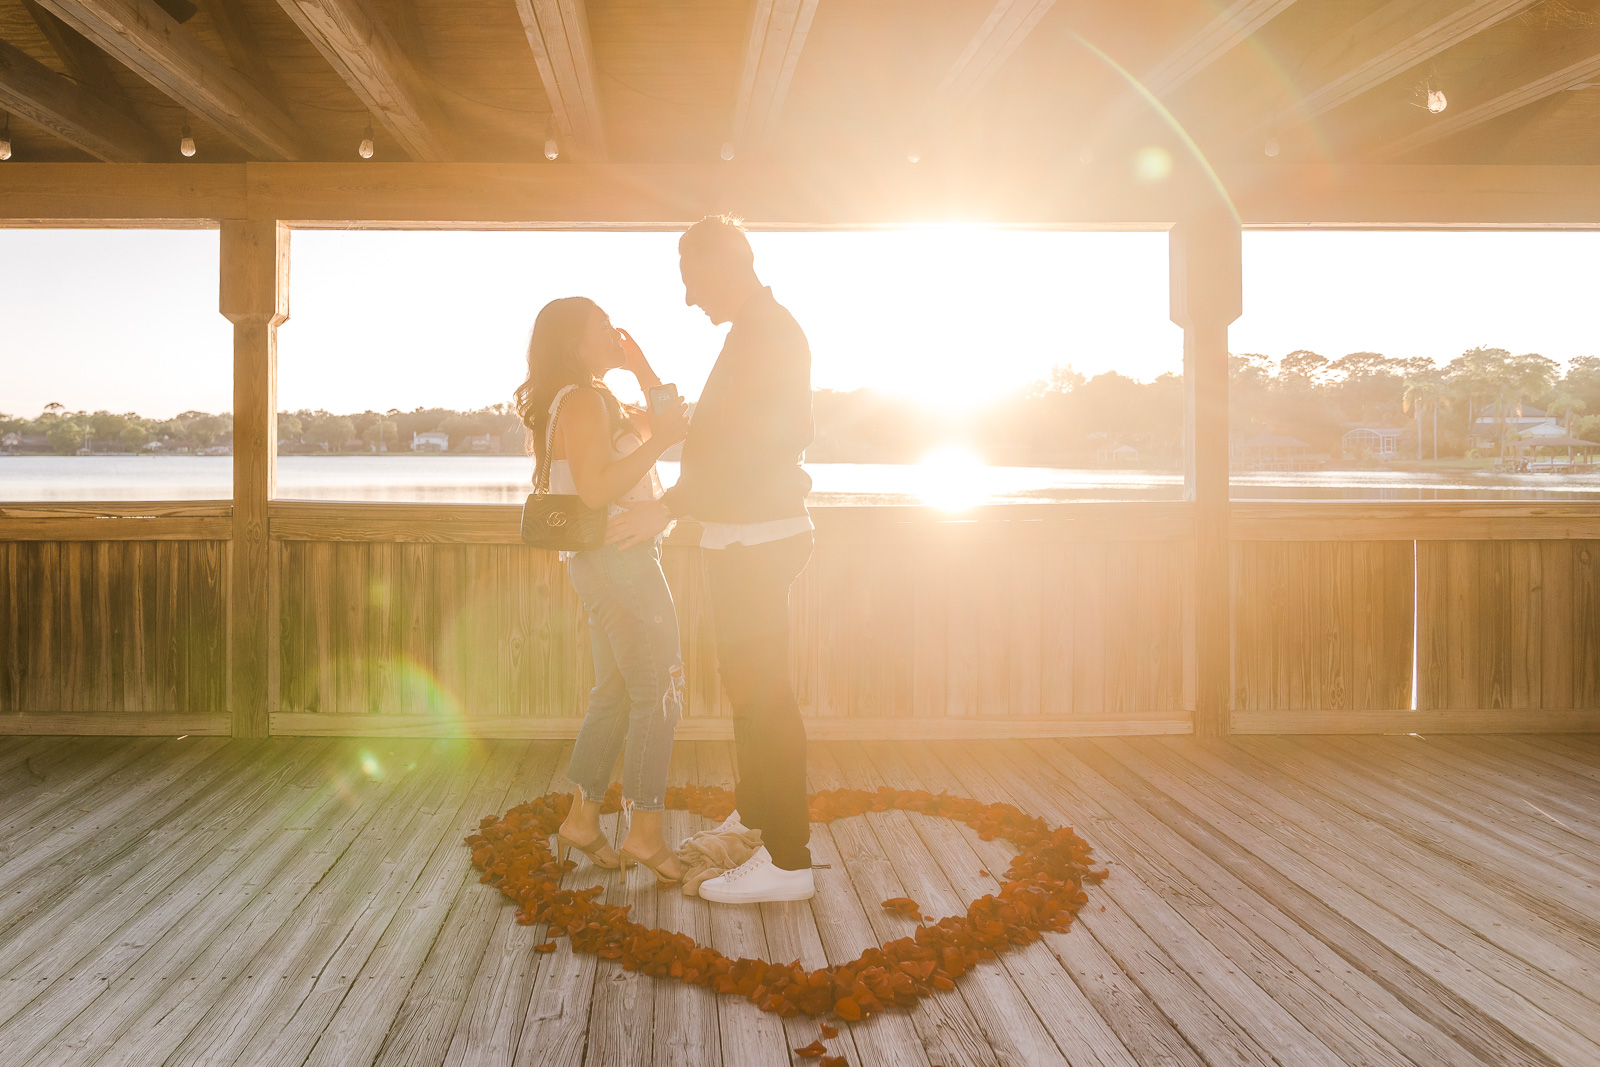 Waterfront sunset location to propose at in Orlando captured by top Engagement photographer Elle